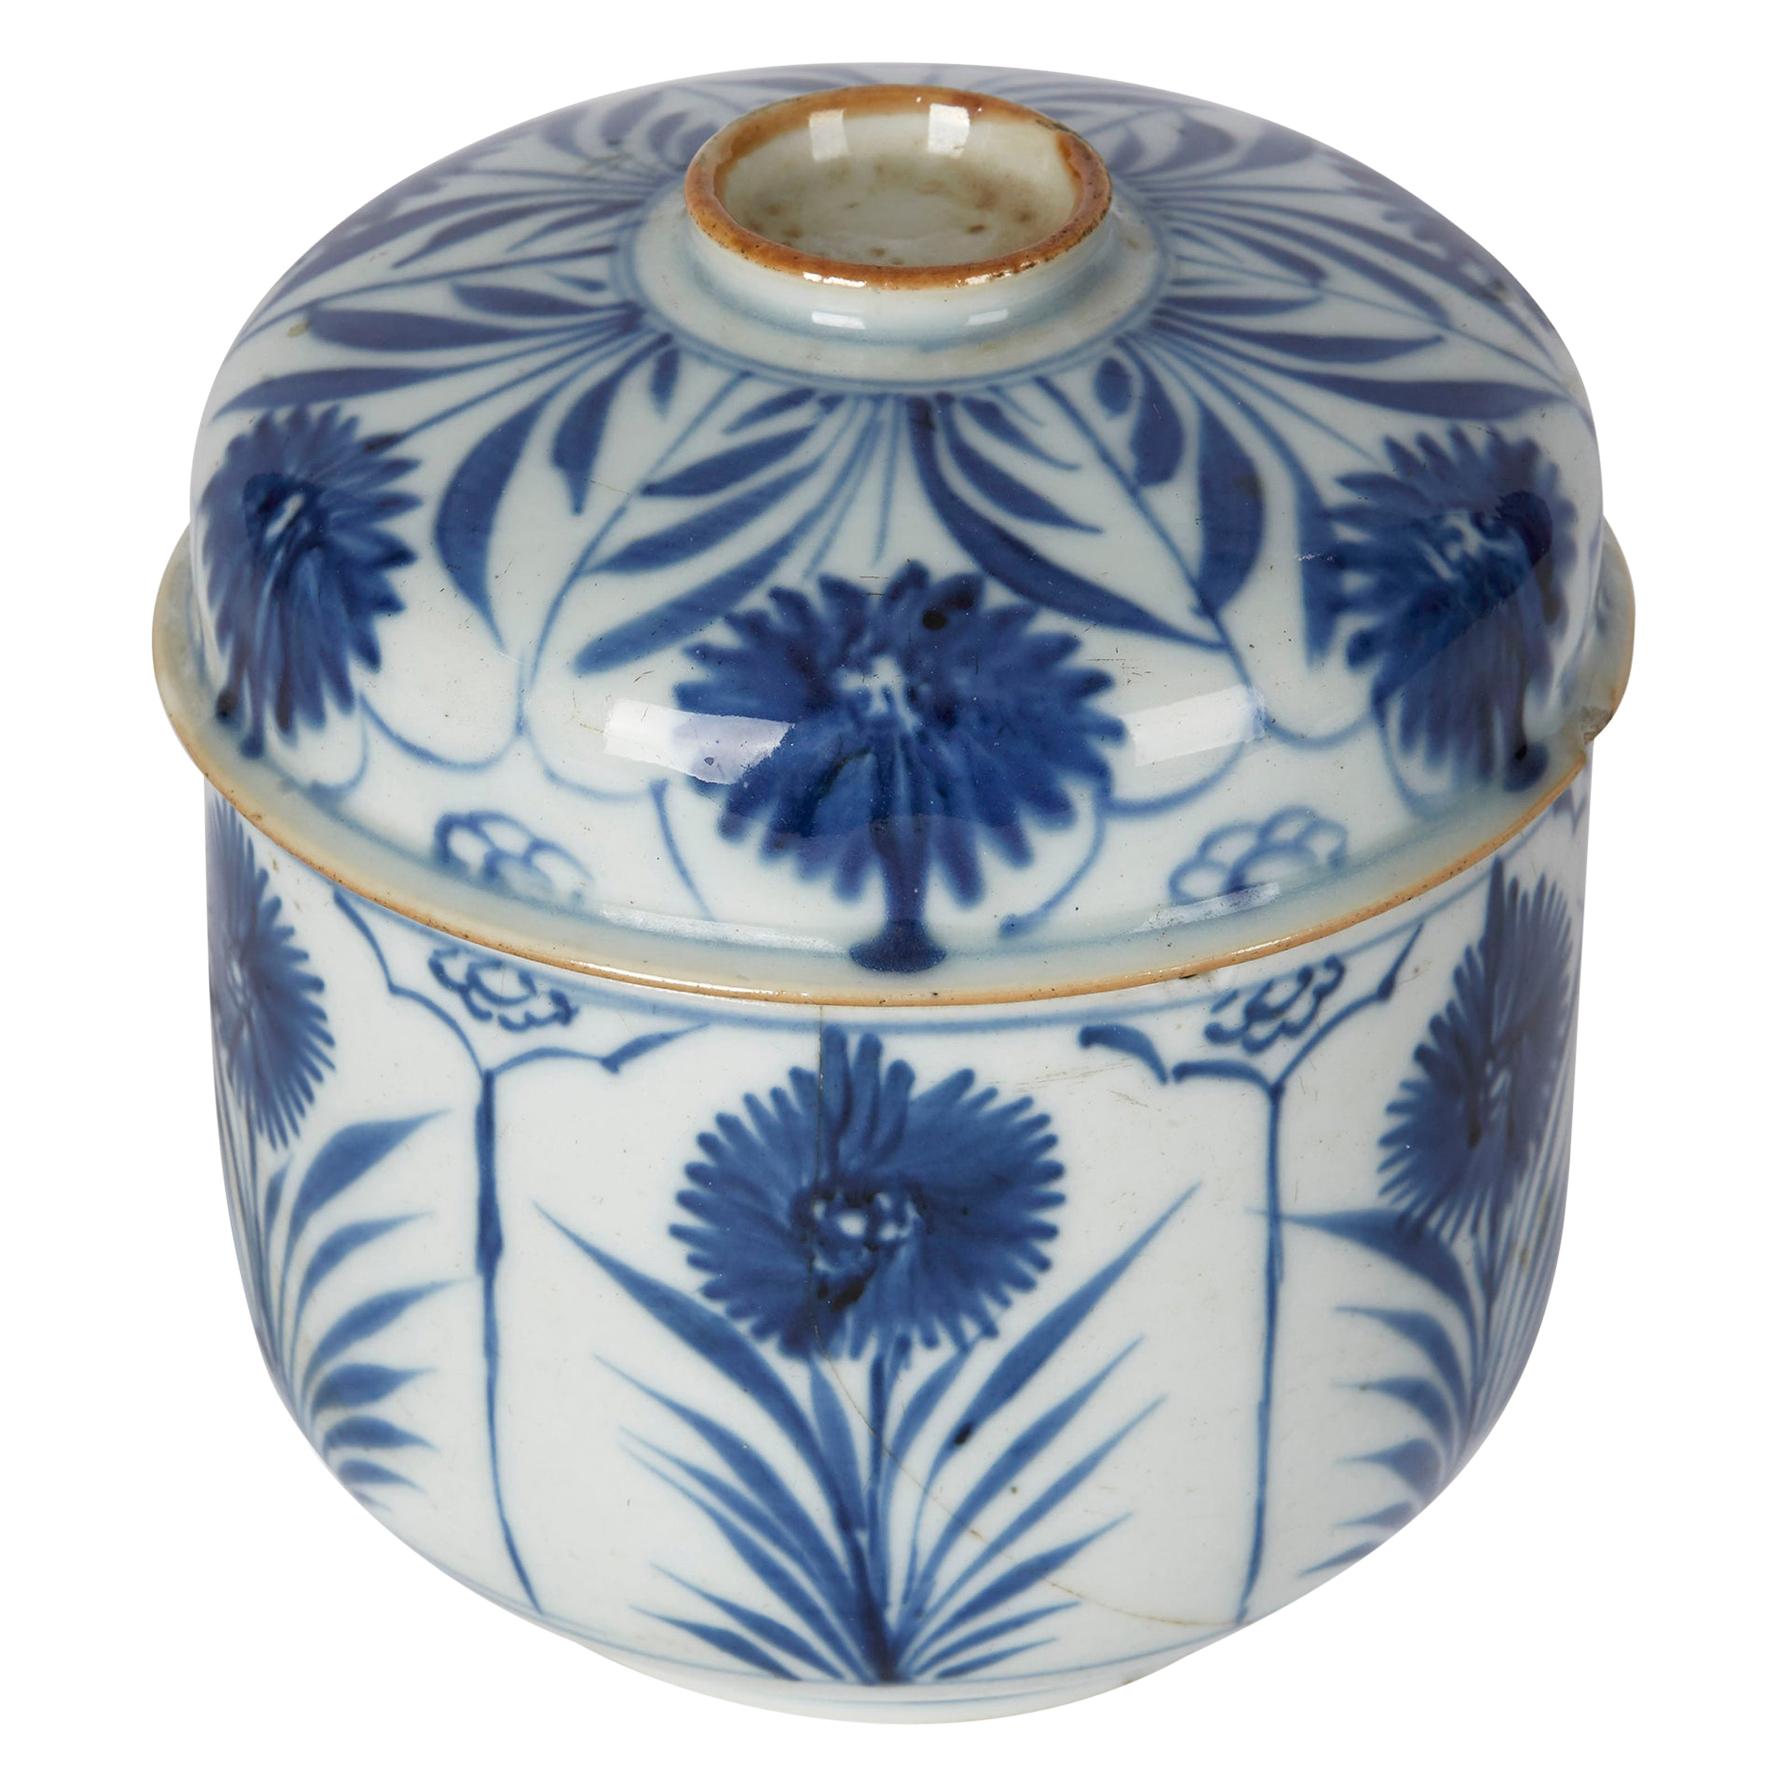 Antique Chinese Porcelain Blue & White Lidded Pot, 18th Century